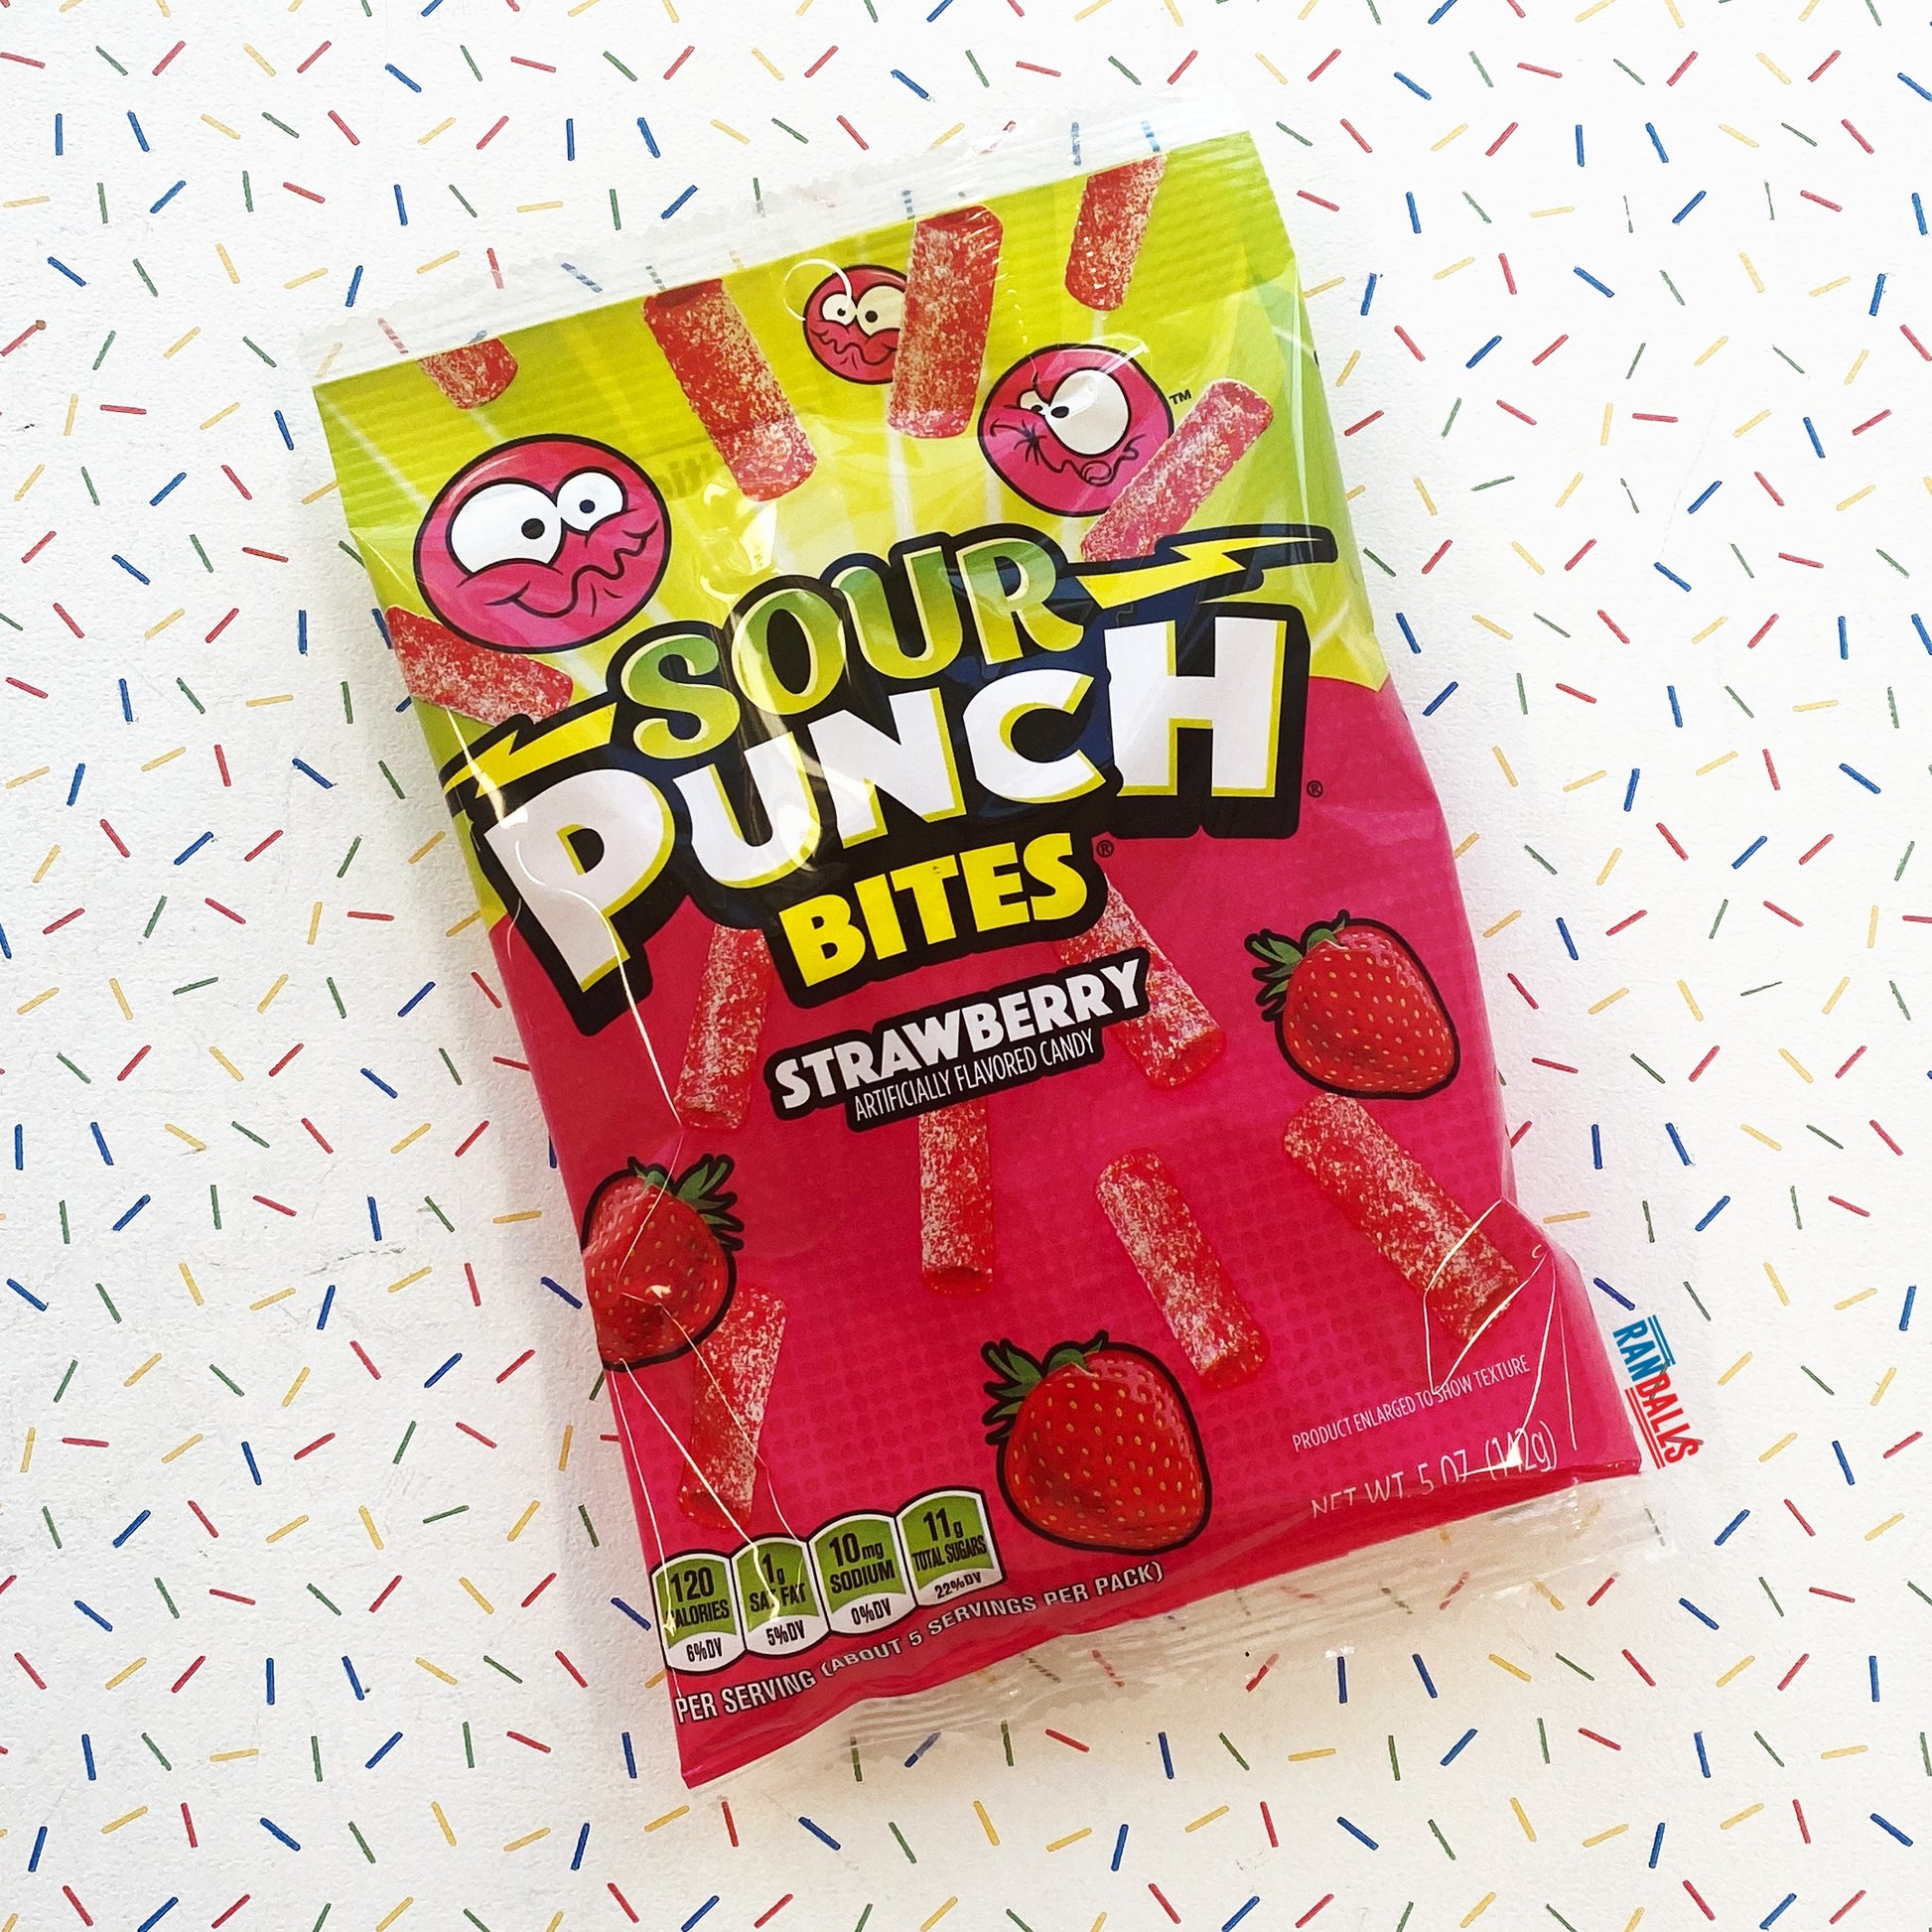 sour punch bites strawberry, chewy, sour, gummy, sweets, candy, sugared, fizzy, usa, randalls